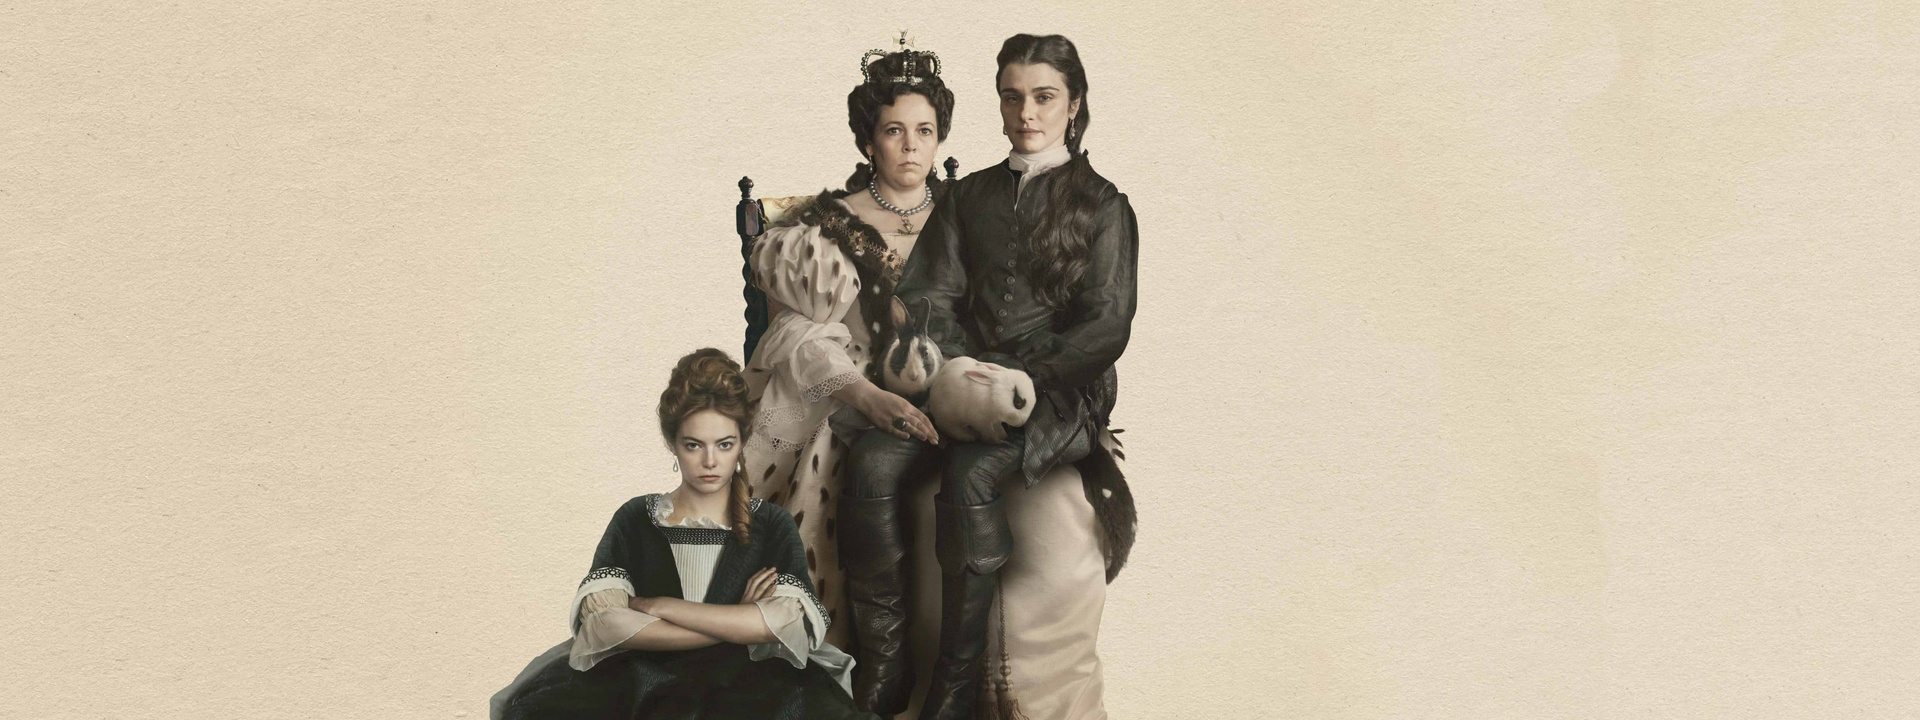 Movie poster The Favourite